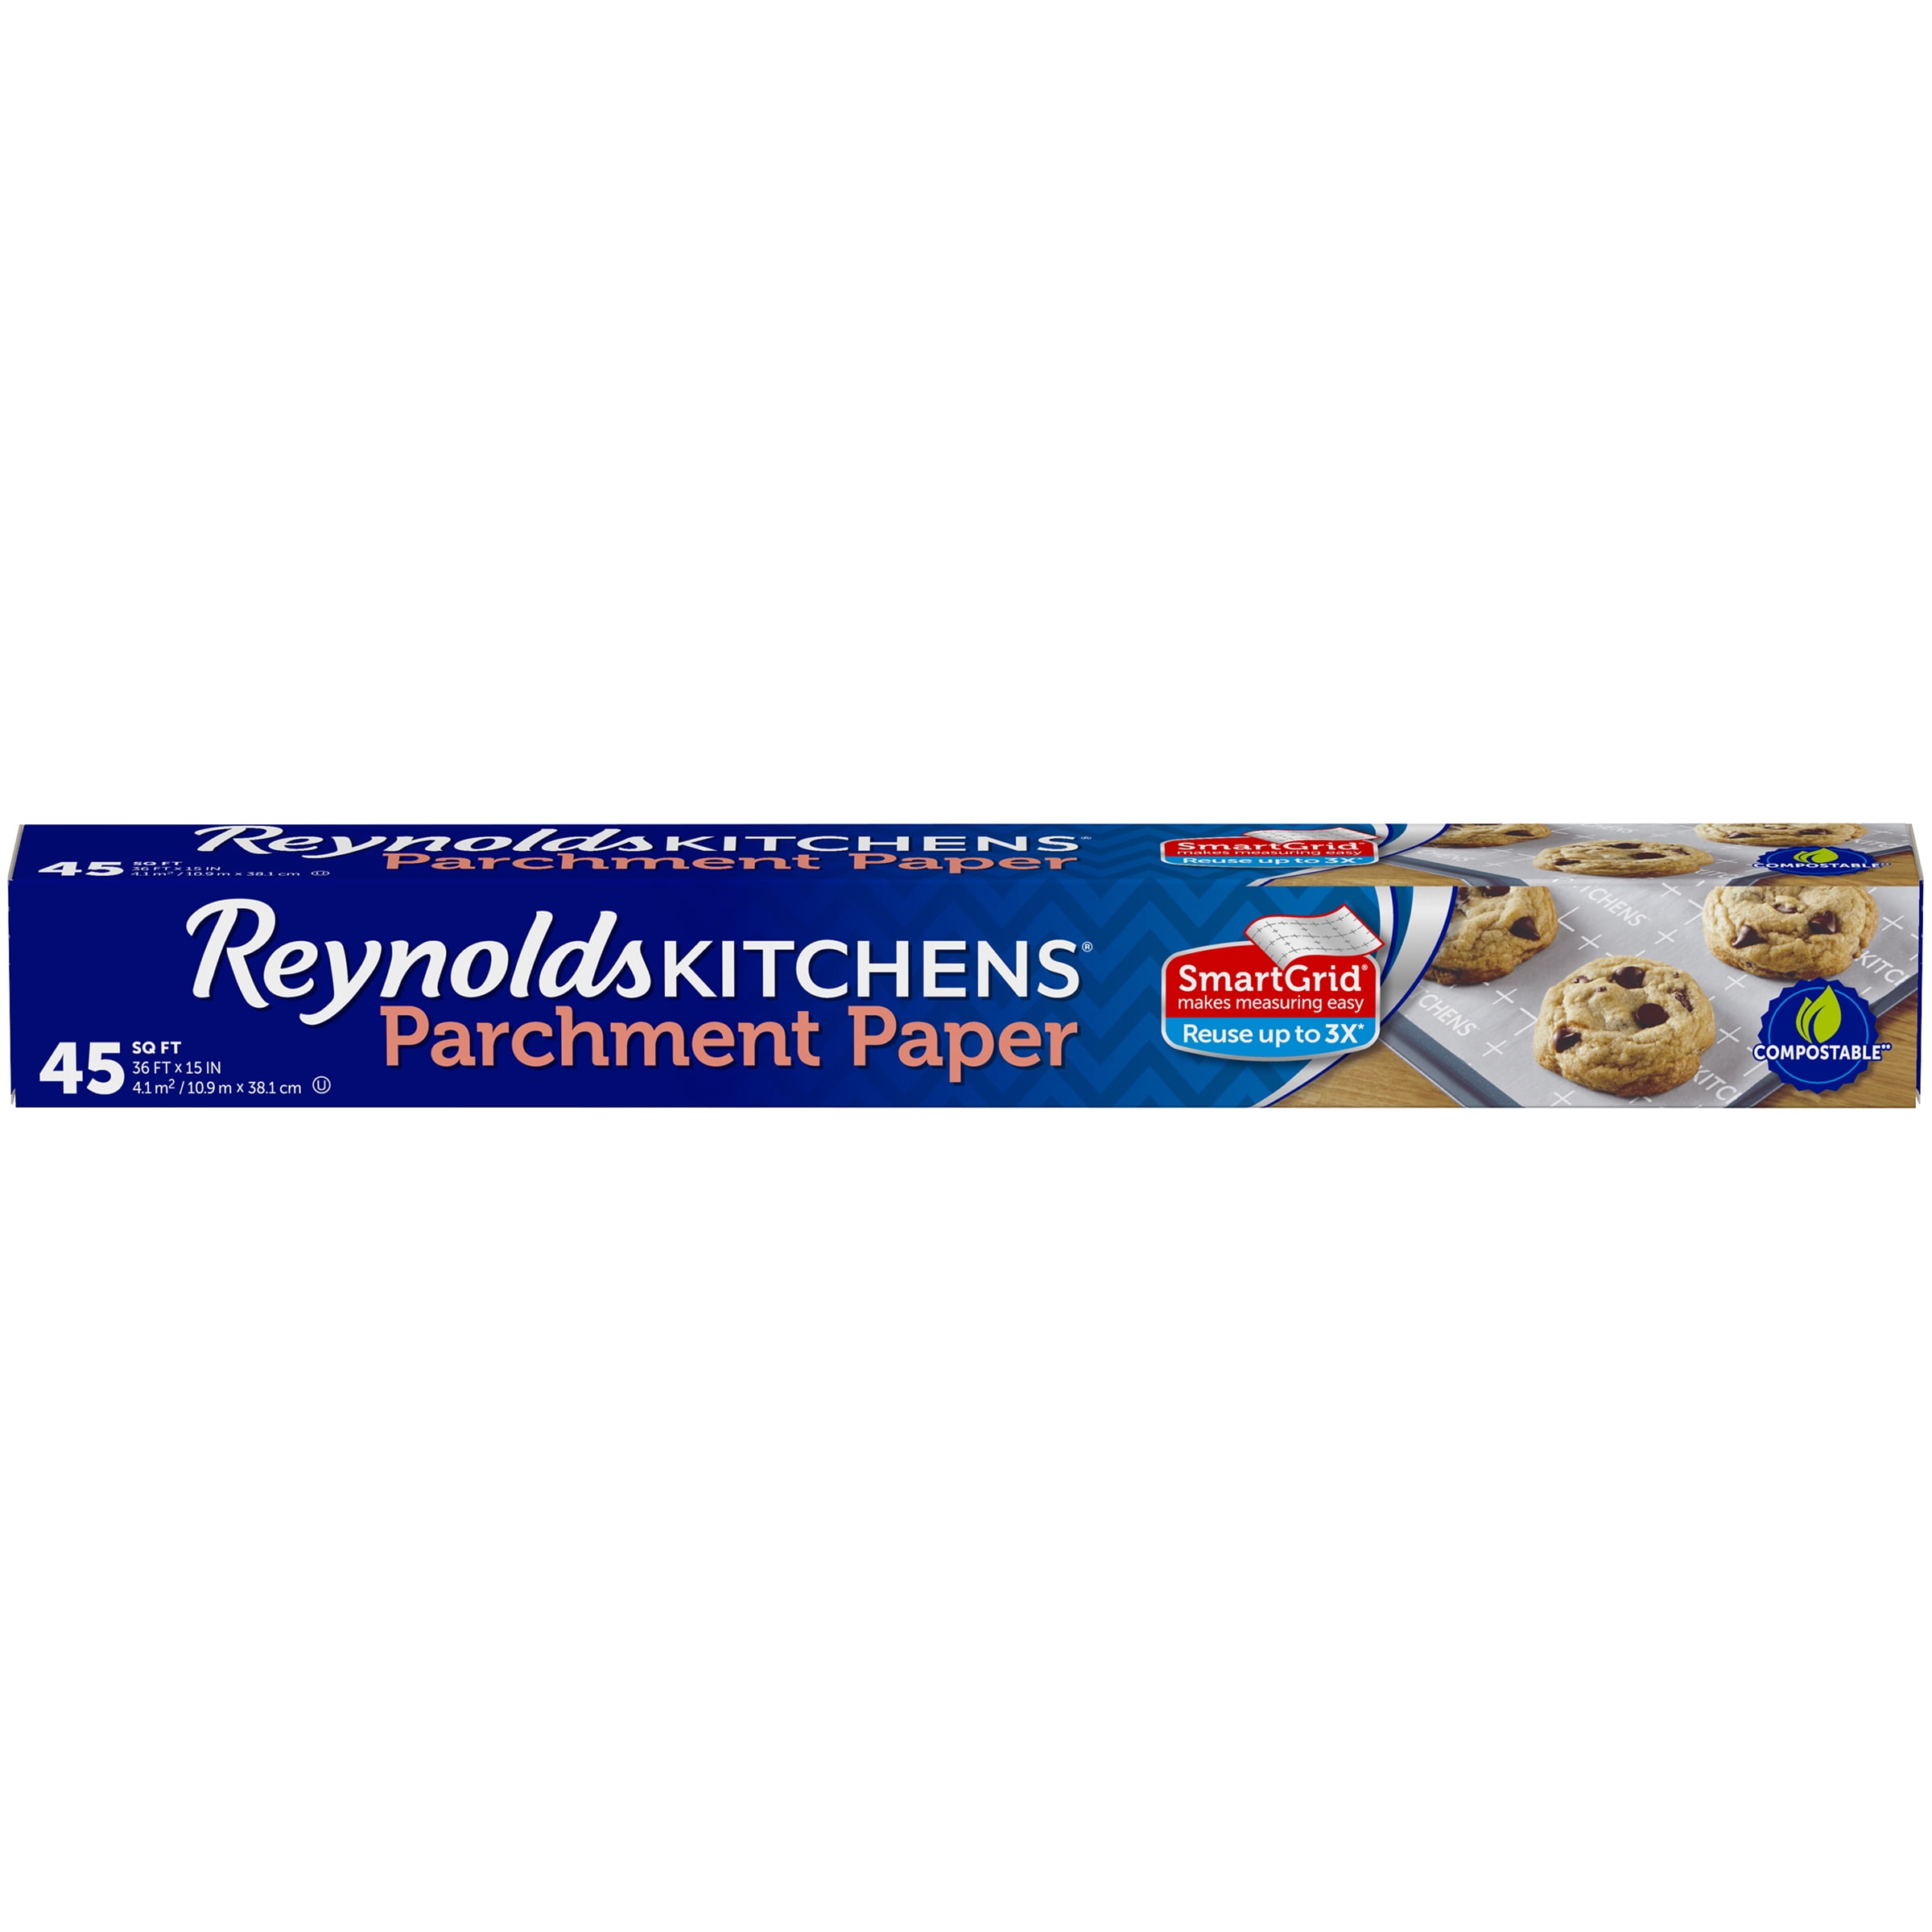 Kitchens Parchment Paper Roll, 60 Square Feet 